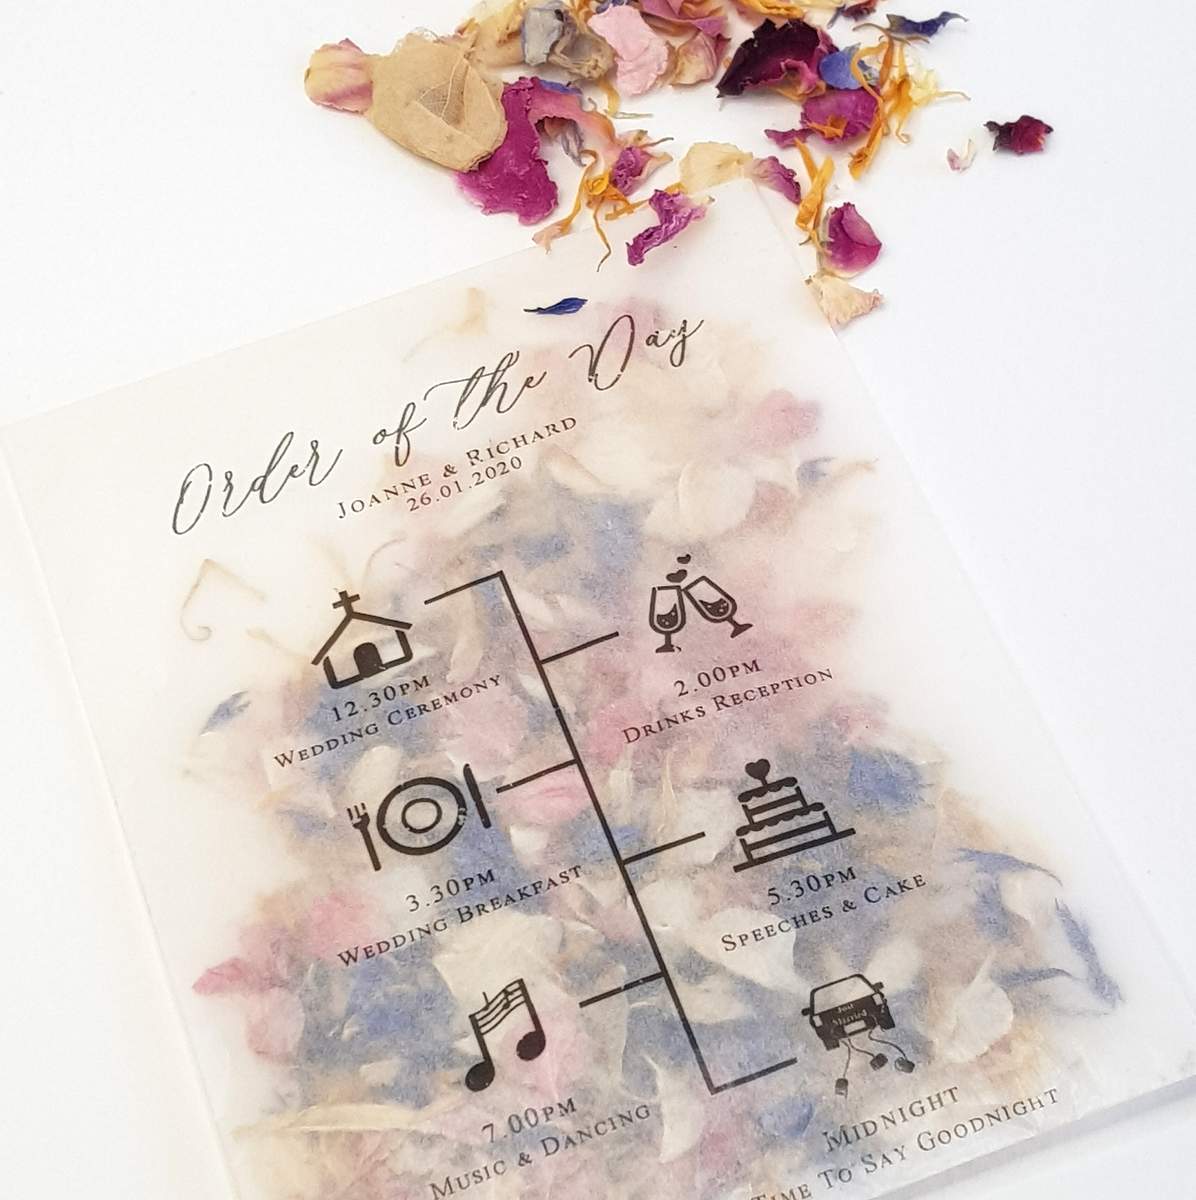 Wedding order of the day timeline confetti bag